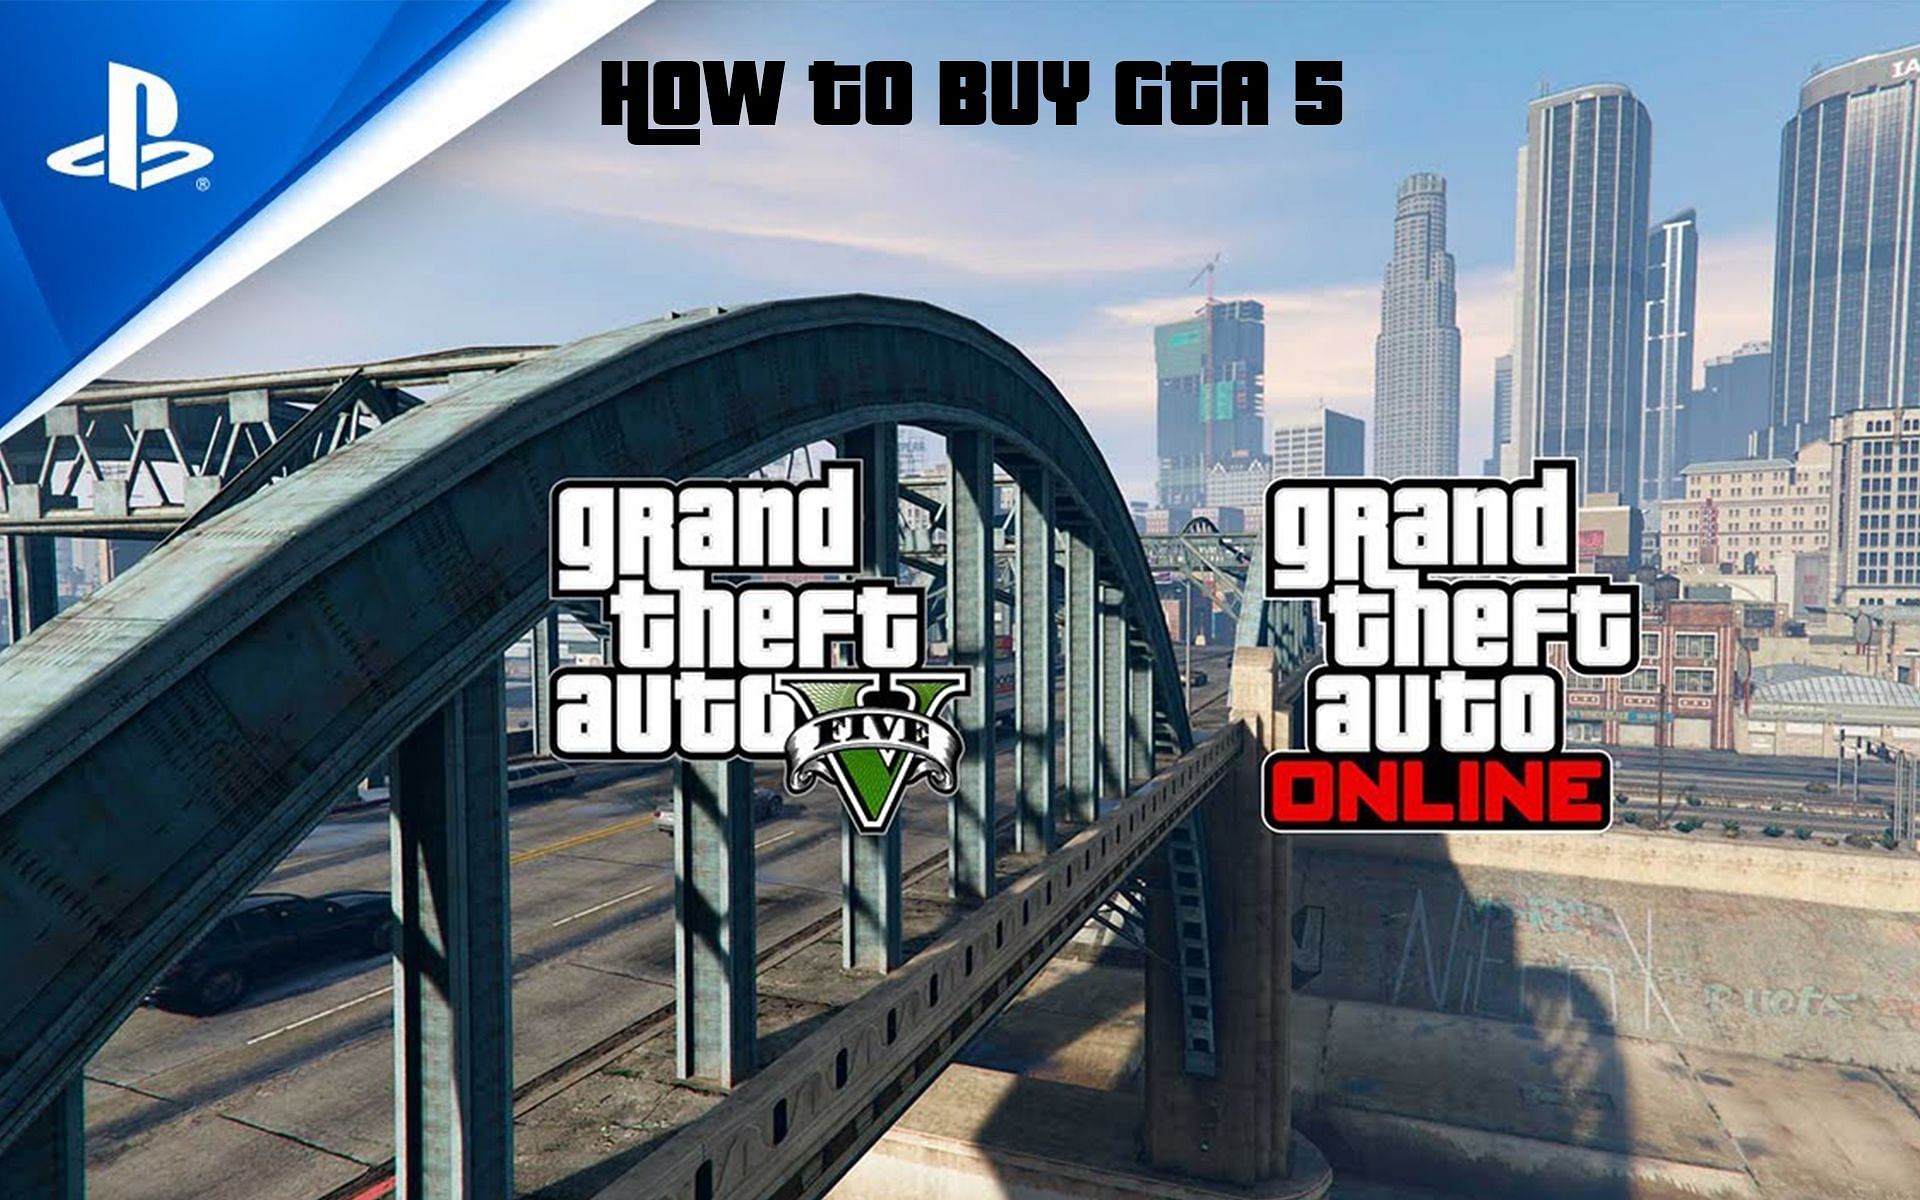 How to buy GTA 5 on PlayStation consoles Stepbystep guide